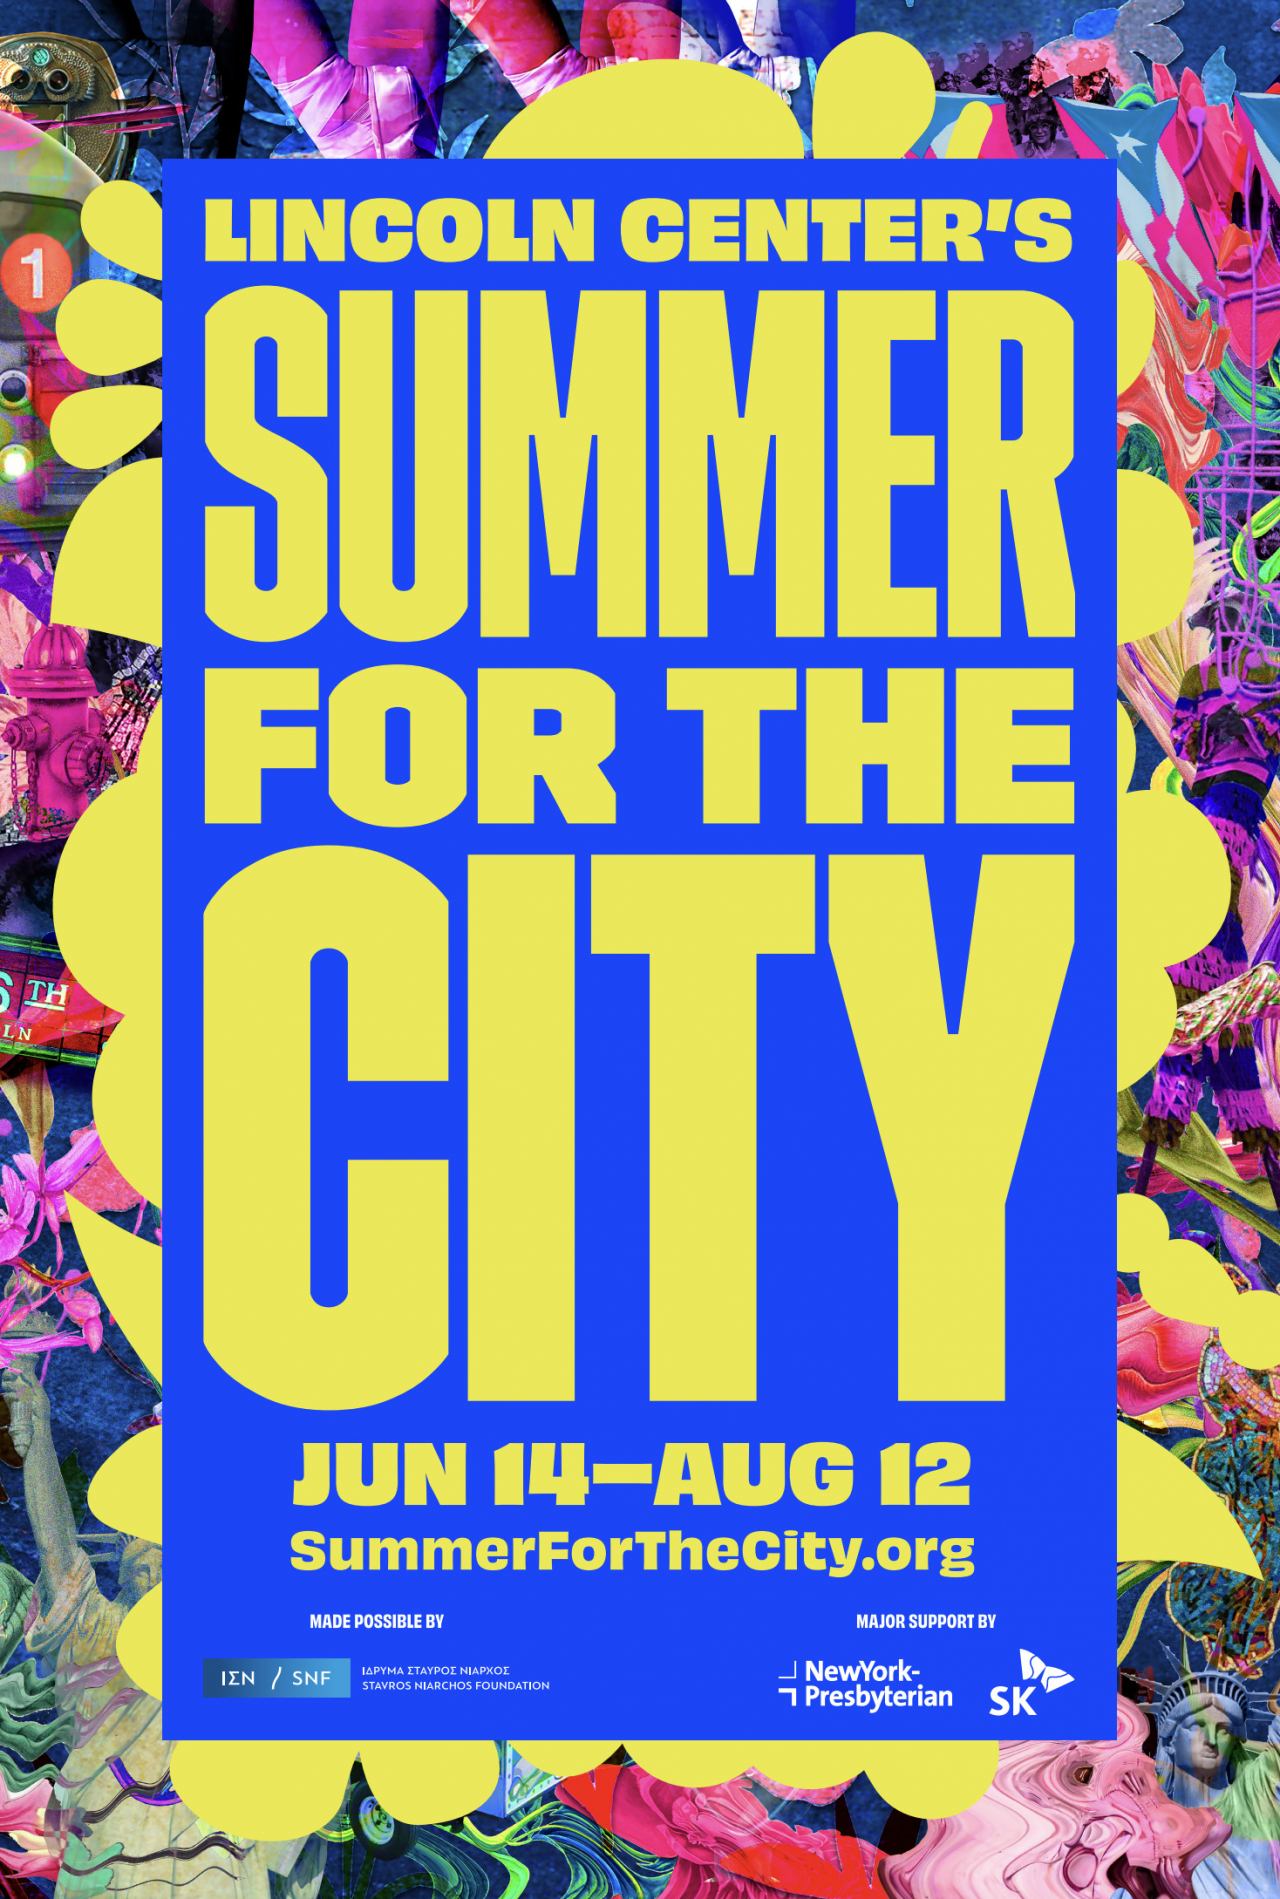 Promotional poster for Lincoln Center's Summer for the City (Lincoln Center)